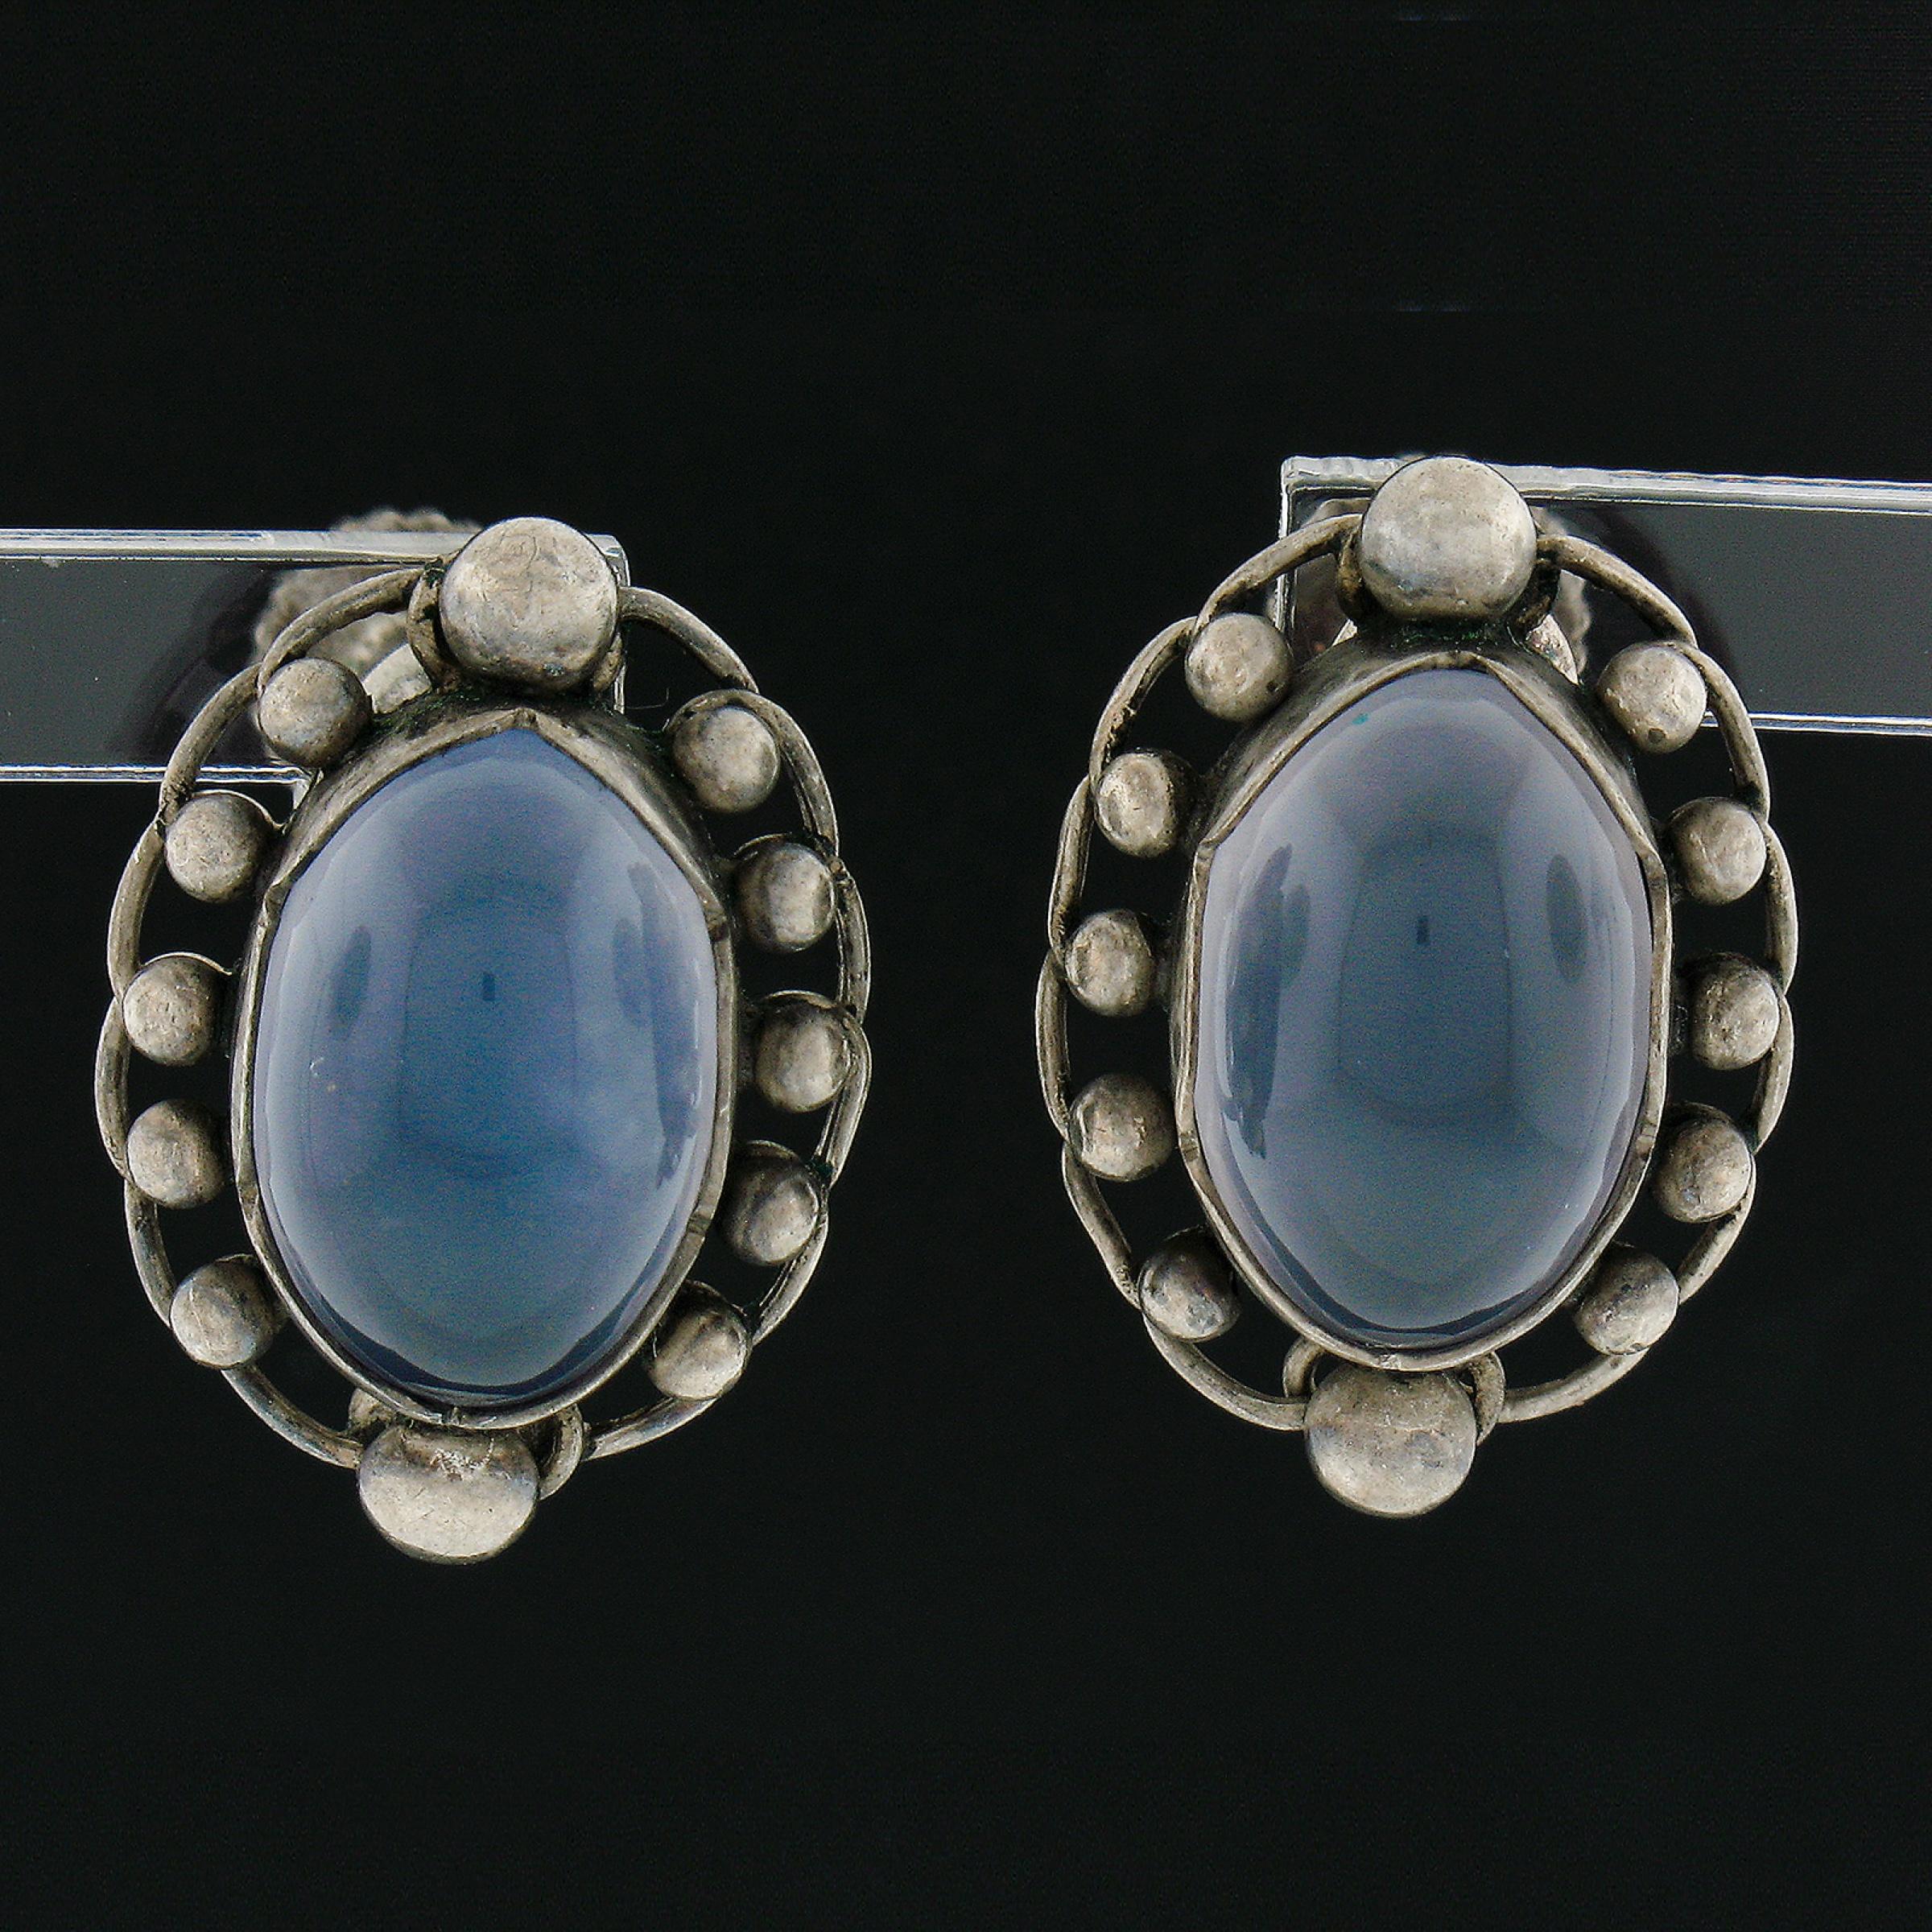 These adorable, vintage made in Denmark #81 pair of earrings By Georg Jensen are crafted in solid sterling silver and feature bezel set chalcedony. The frame is beaded open work and hand made. These earrings are secured with their original screw-on